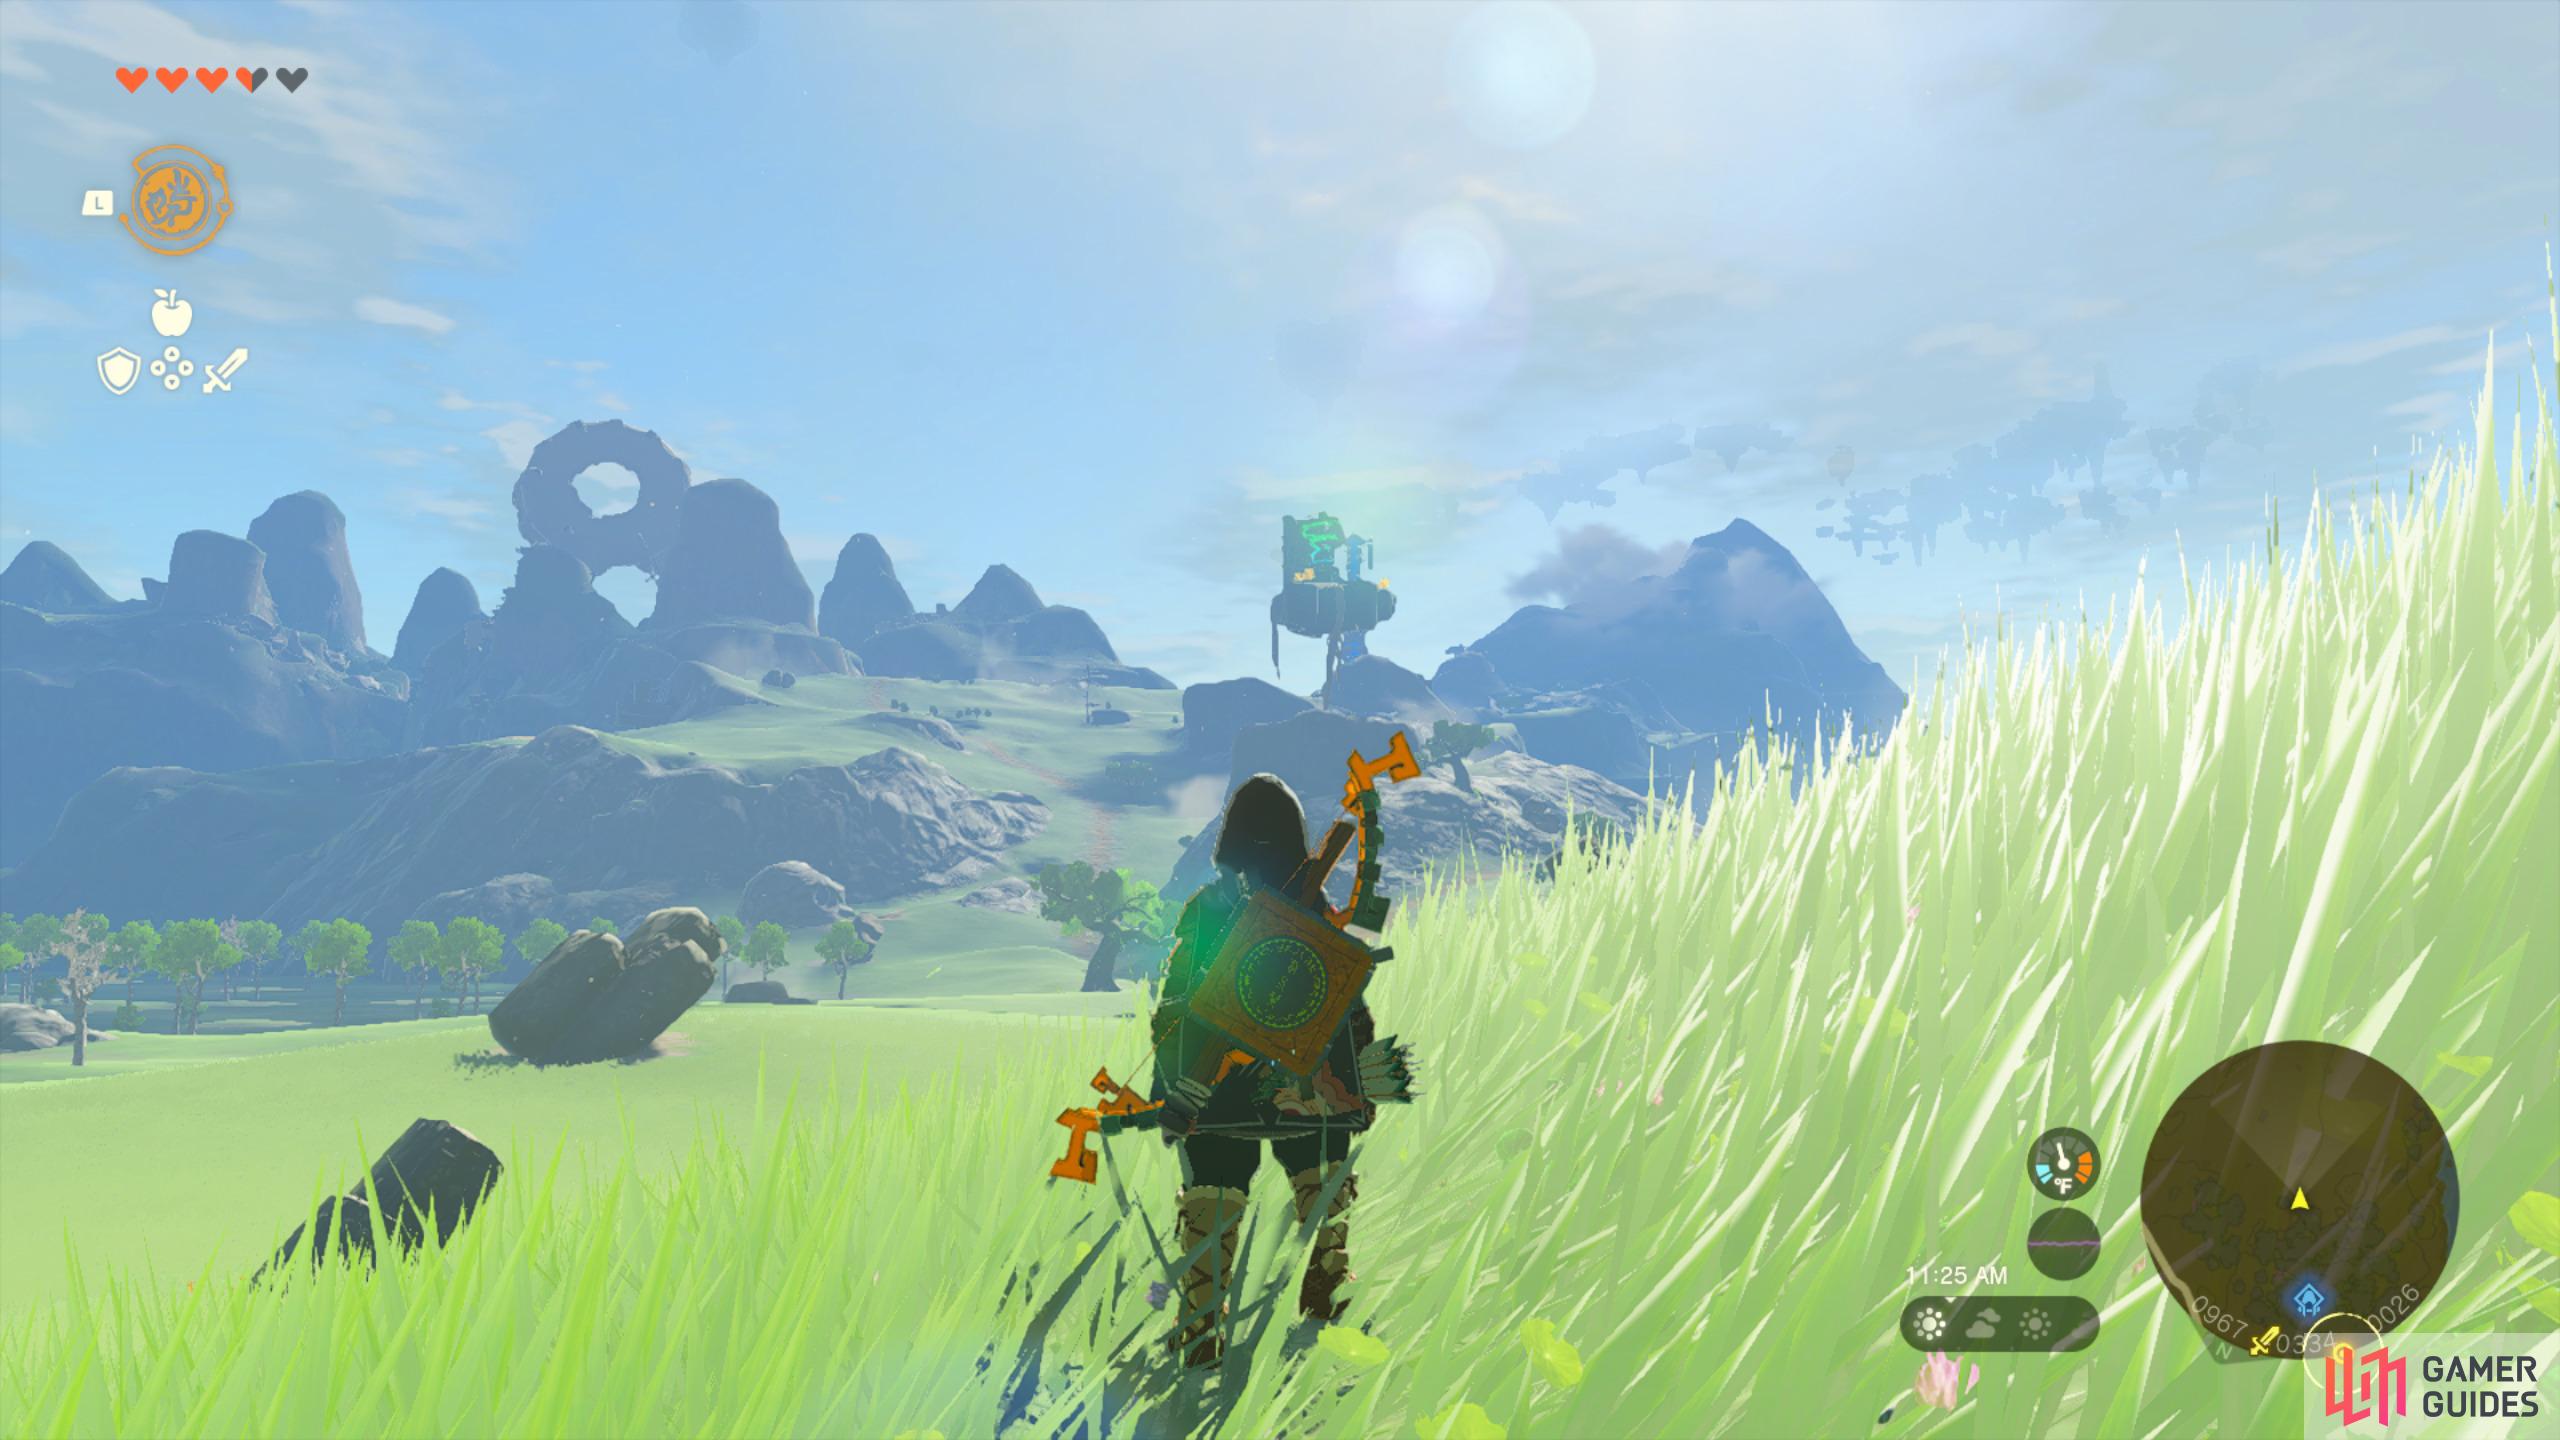 You can see the Morok Shrine floating in the distance.